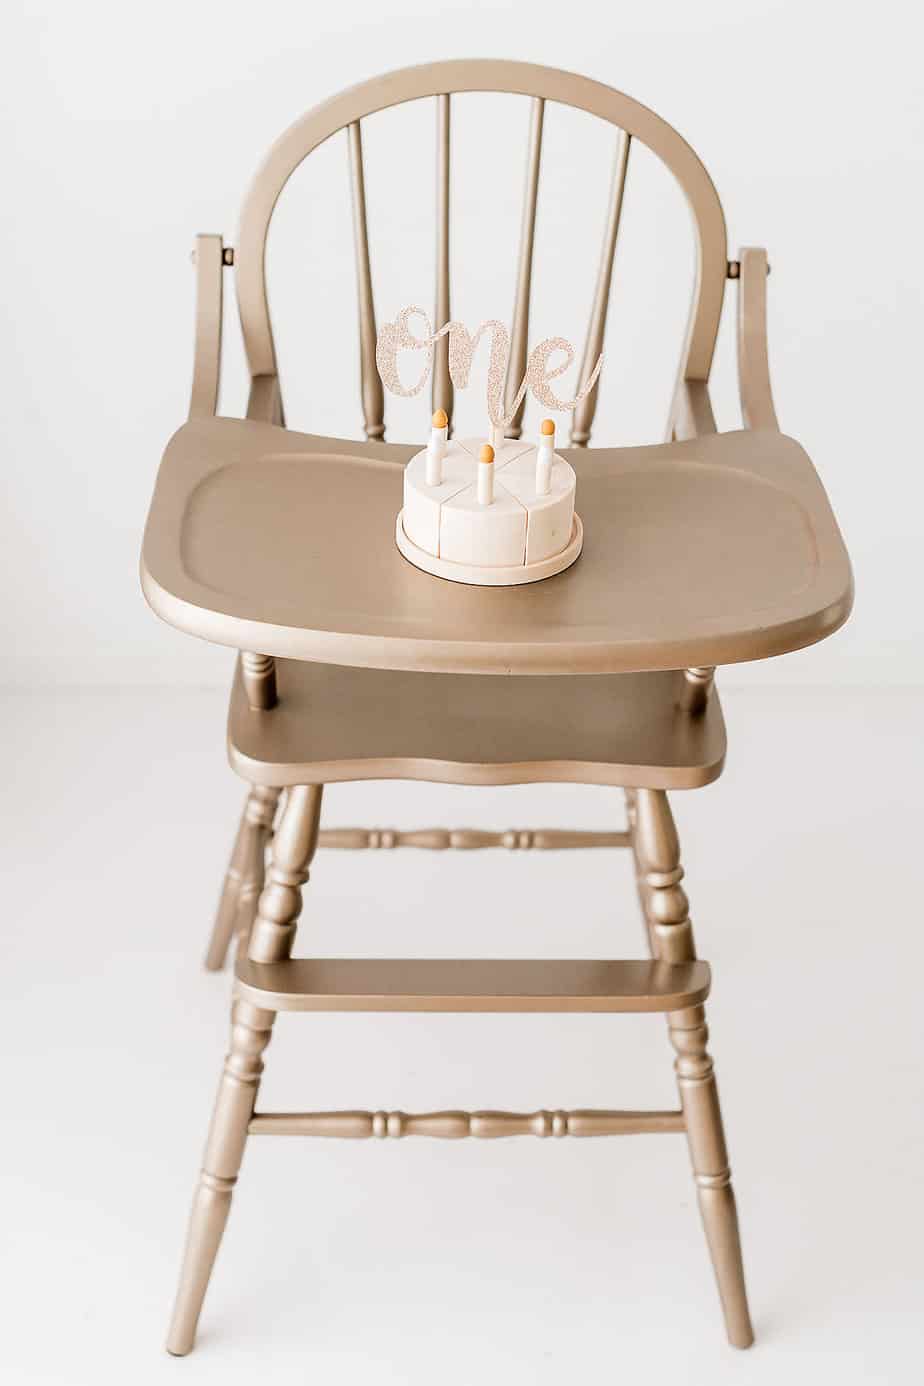 wooden cake on gold high chair